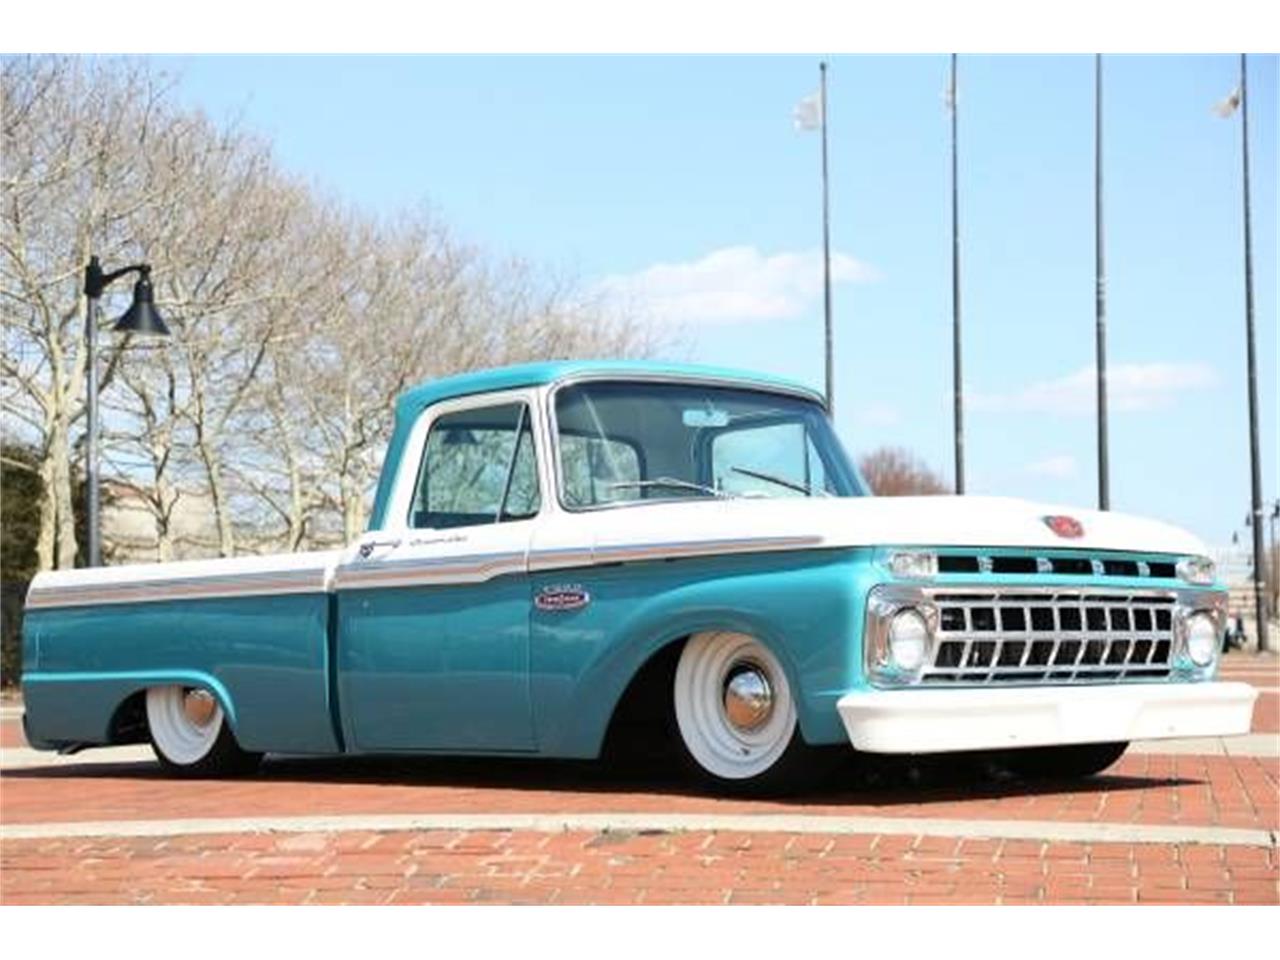 For Sale: 1965 Ford F100 in Cadillac, Michigan.